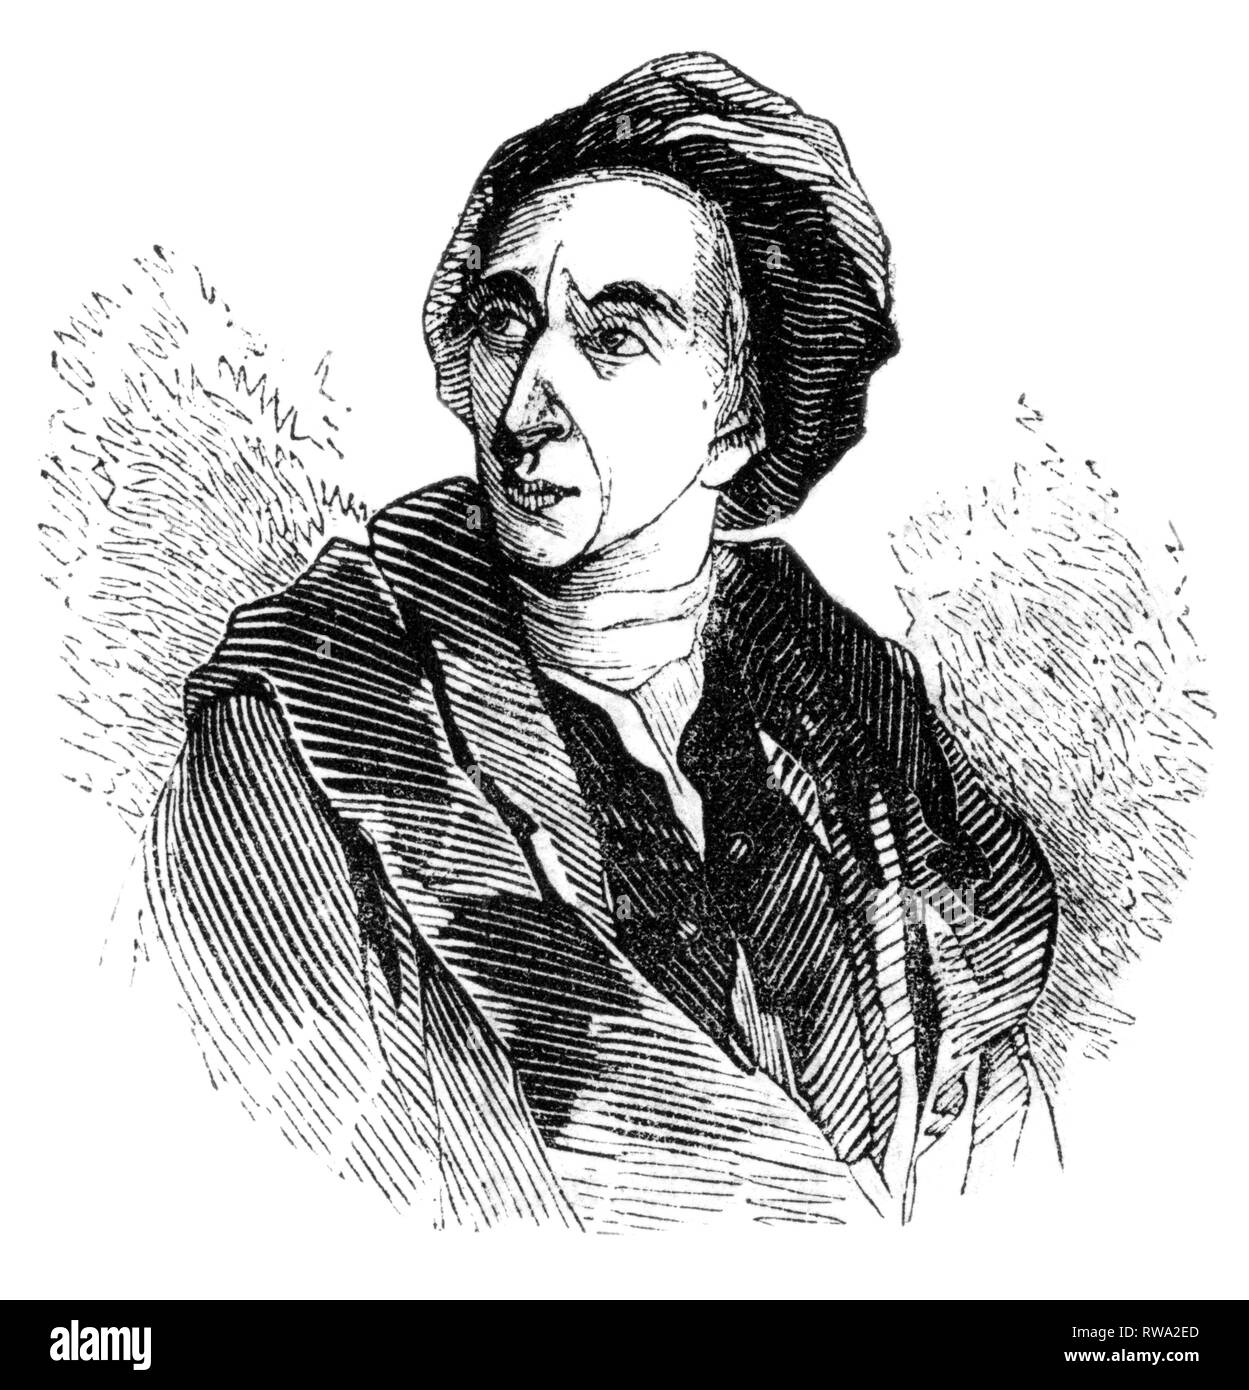 Alexander Pope (1688-1744) as drawn from a painting by William Hoare, Twickenham, London, UK. Pope built Pope's Grotto Stock Photo